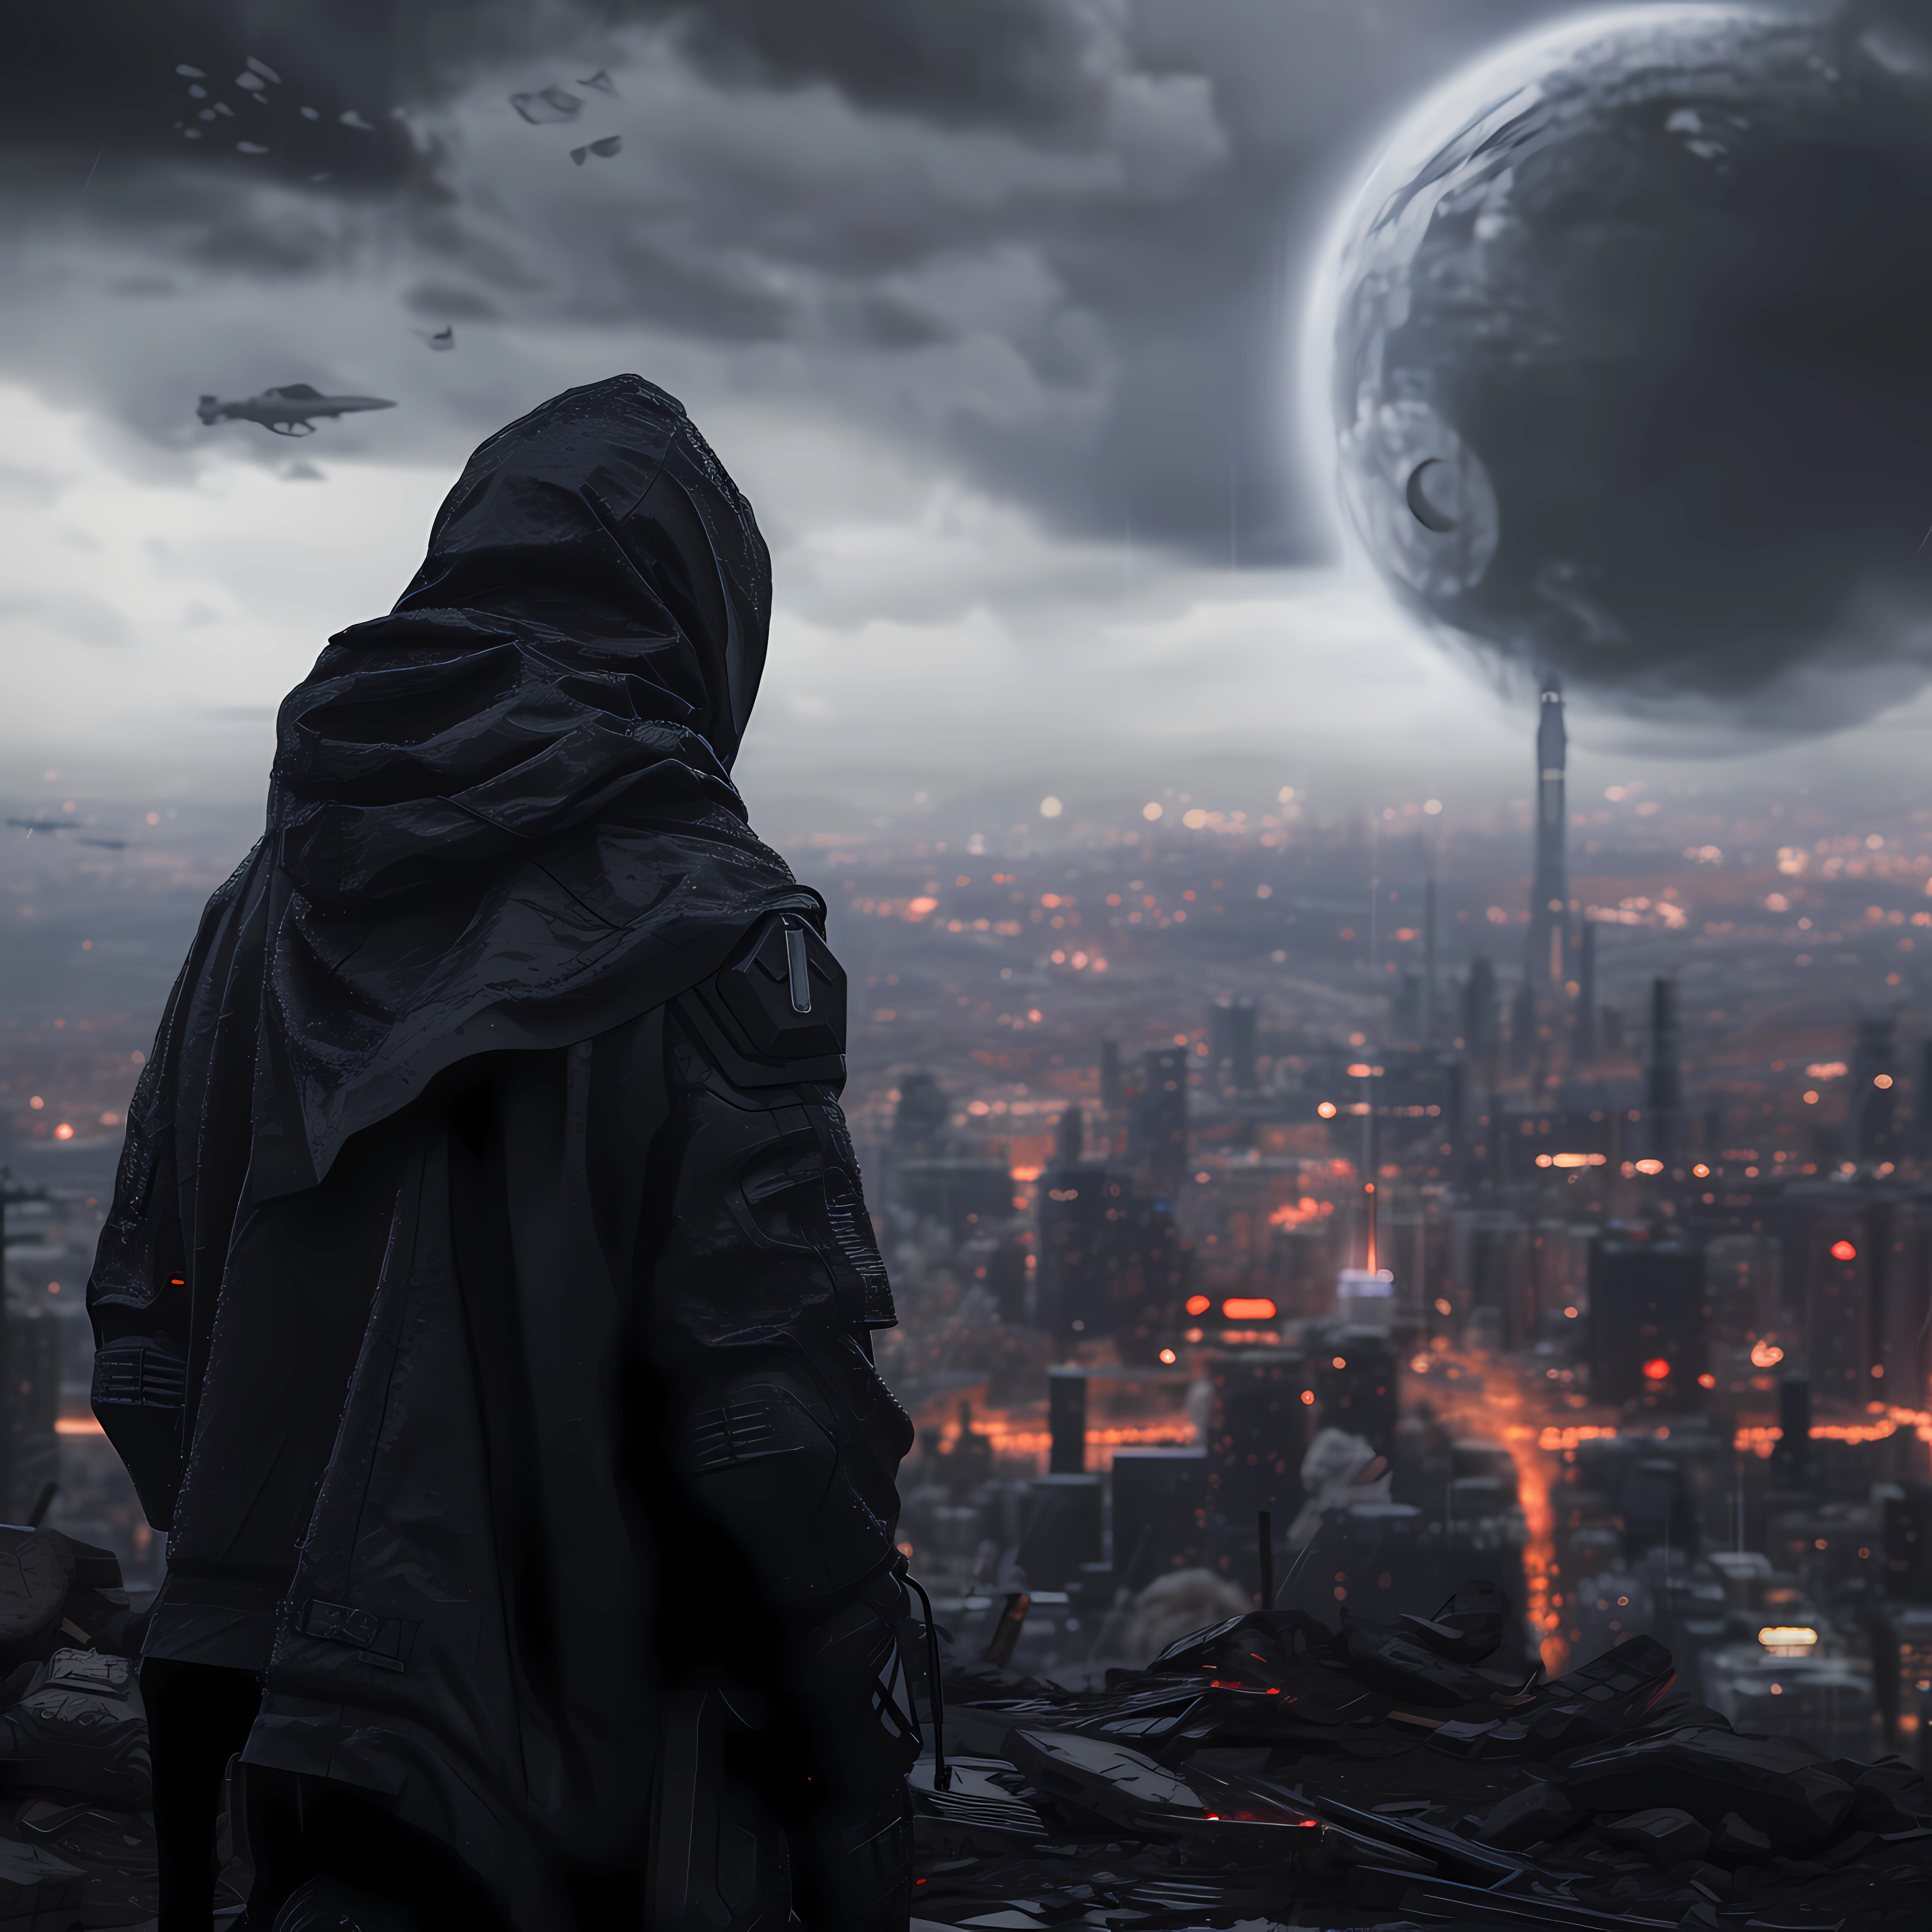 Avatar of a cloaked figure overlooking a dystopian cityscape with a large planet looming in the dark sky, conveying a post-apocalyptic atmosphere.